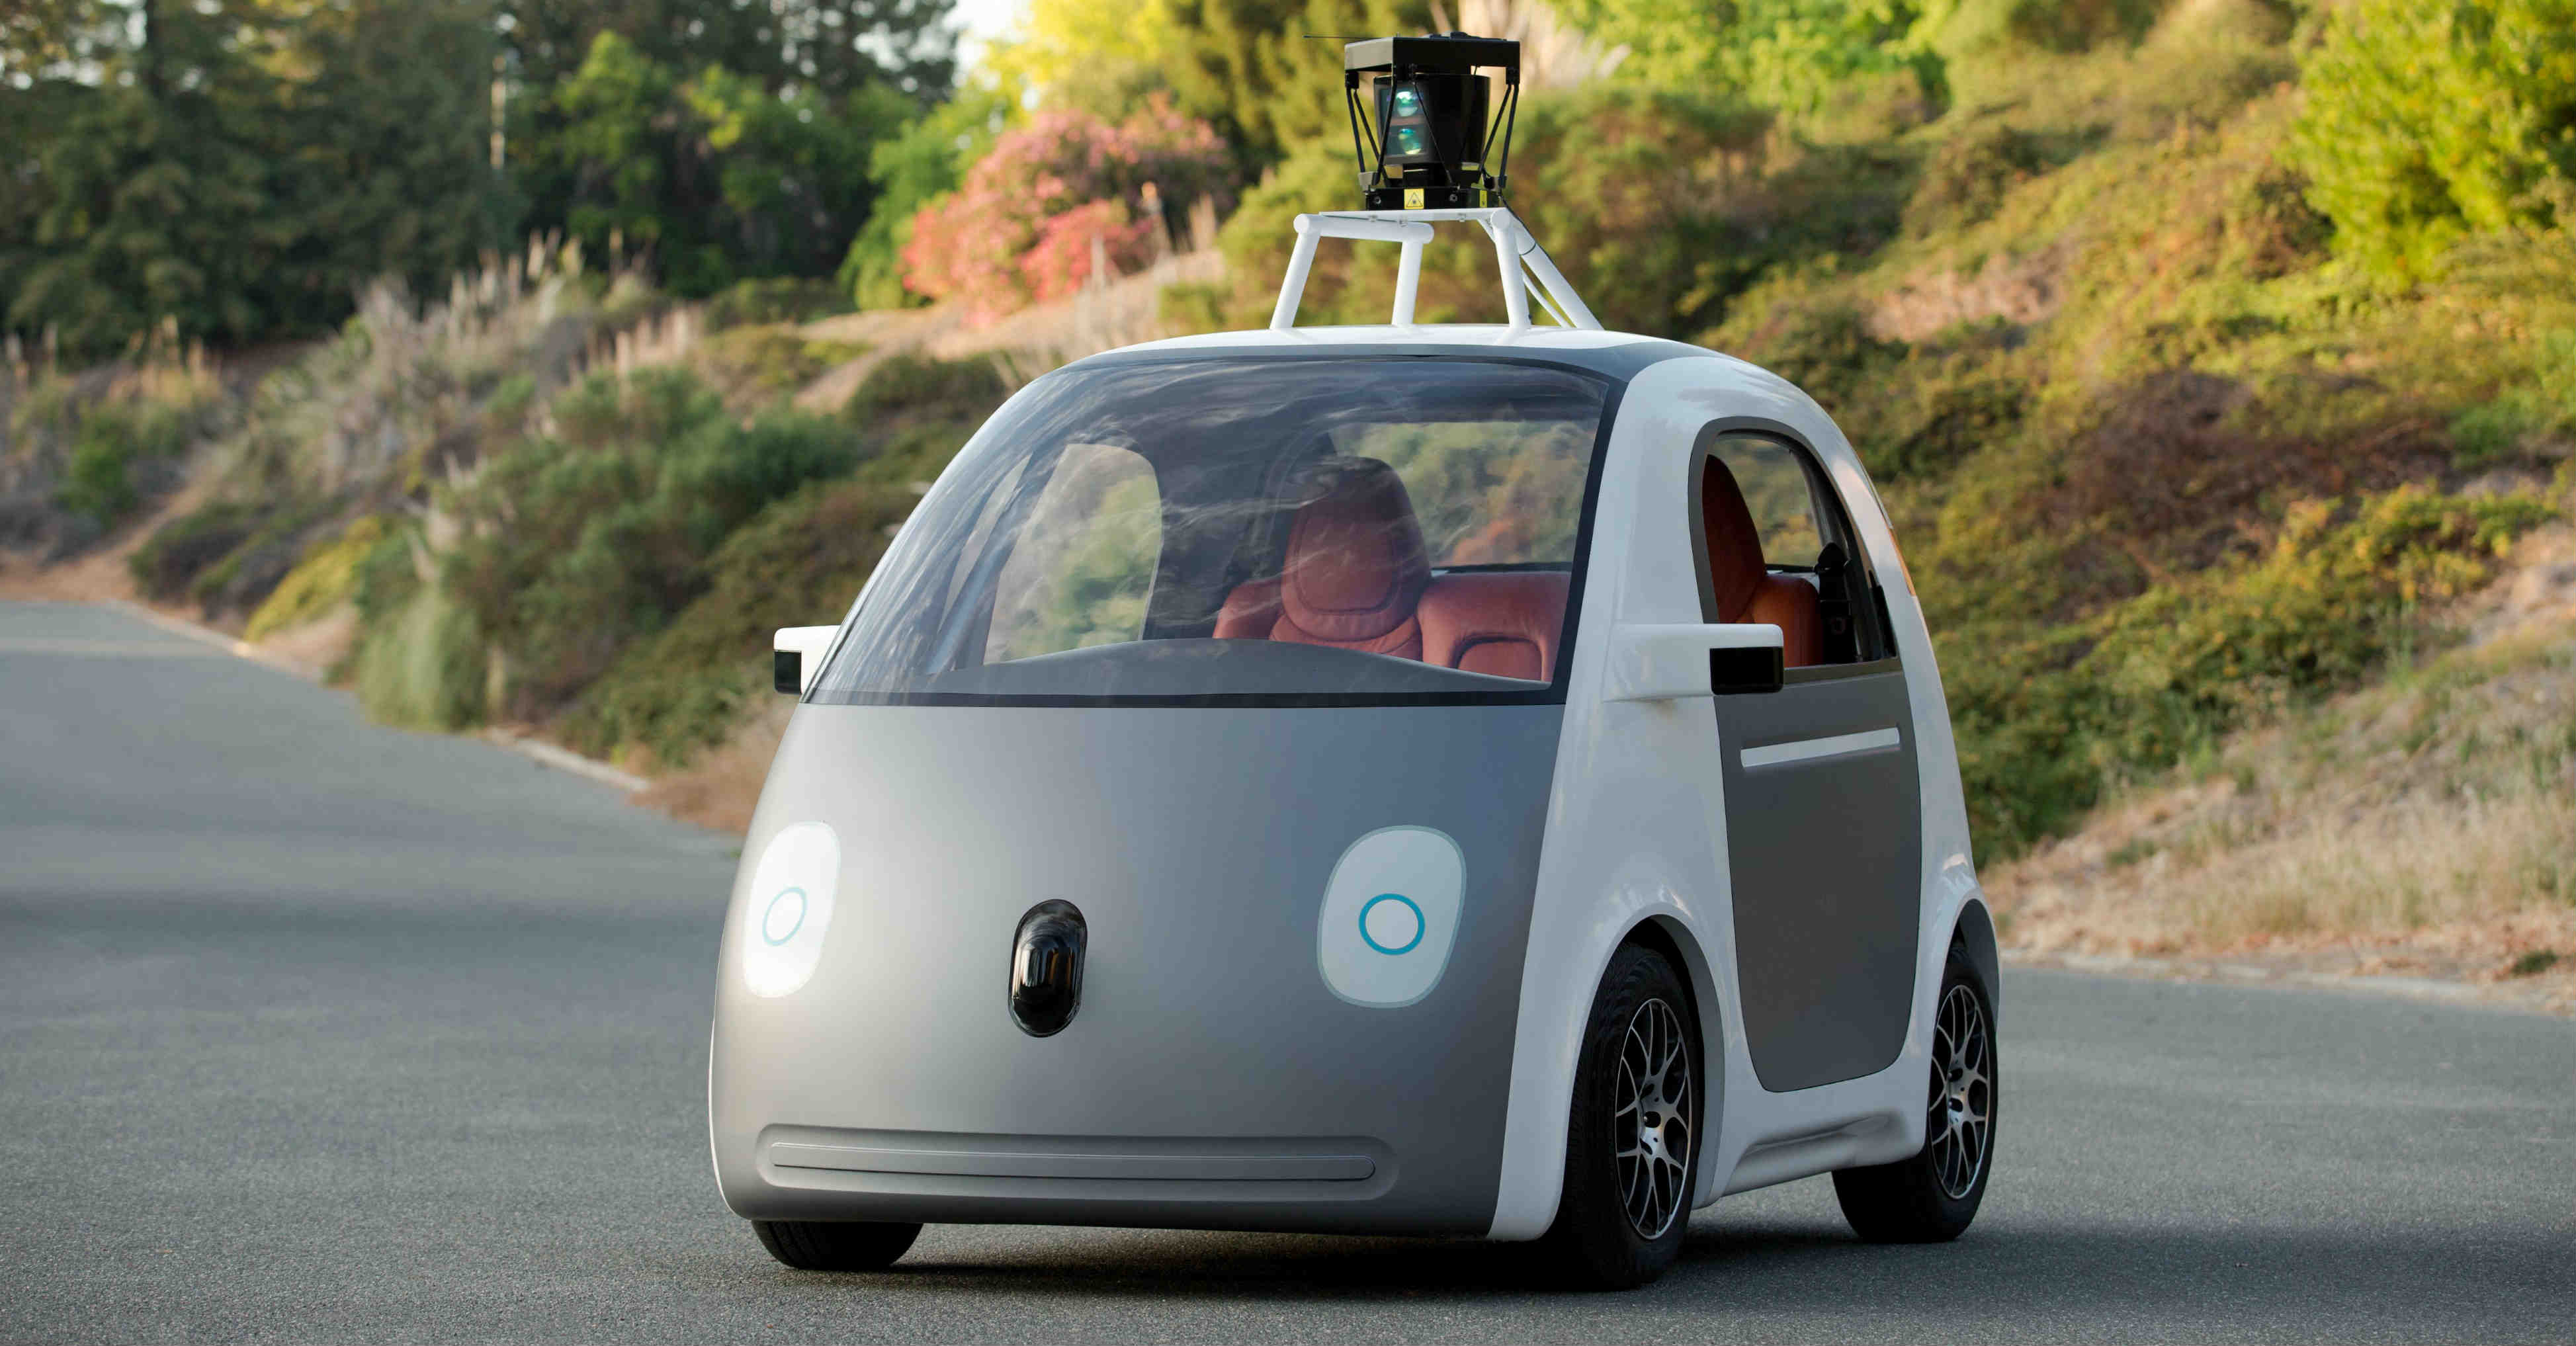 Google has developed its first fully functional autonomous vehicle